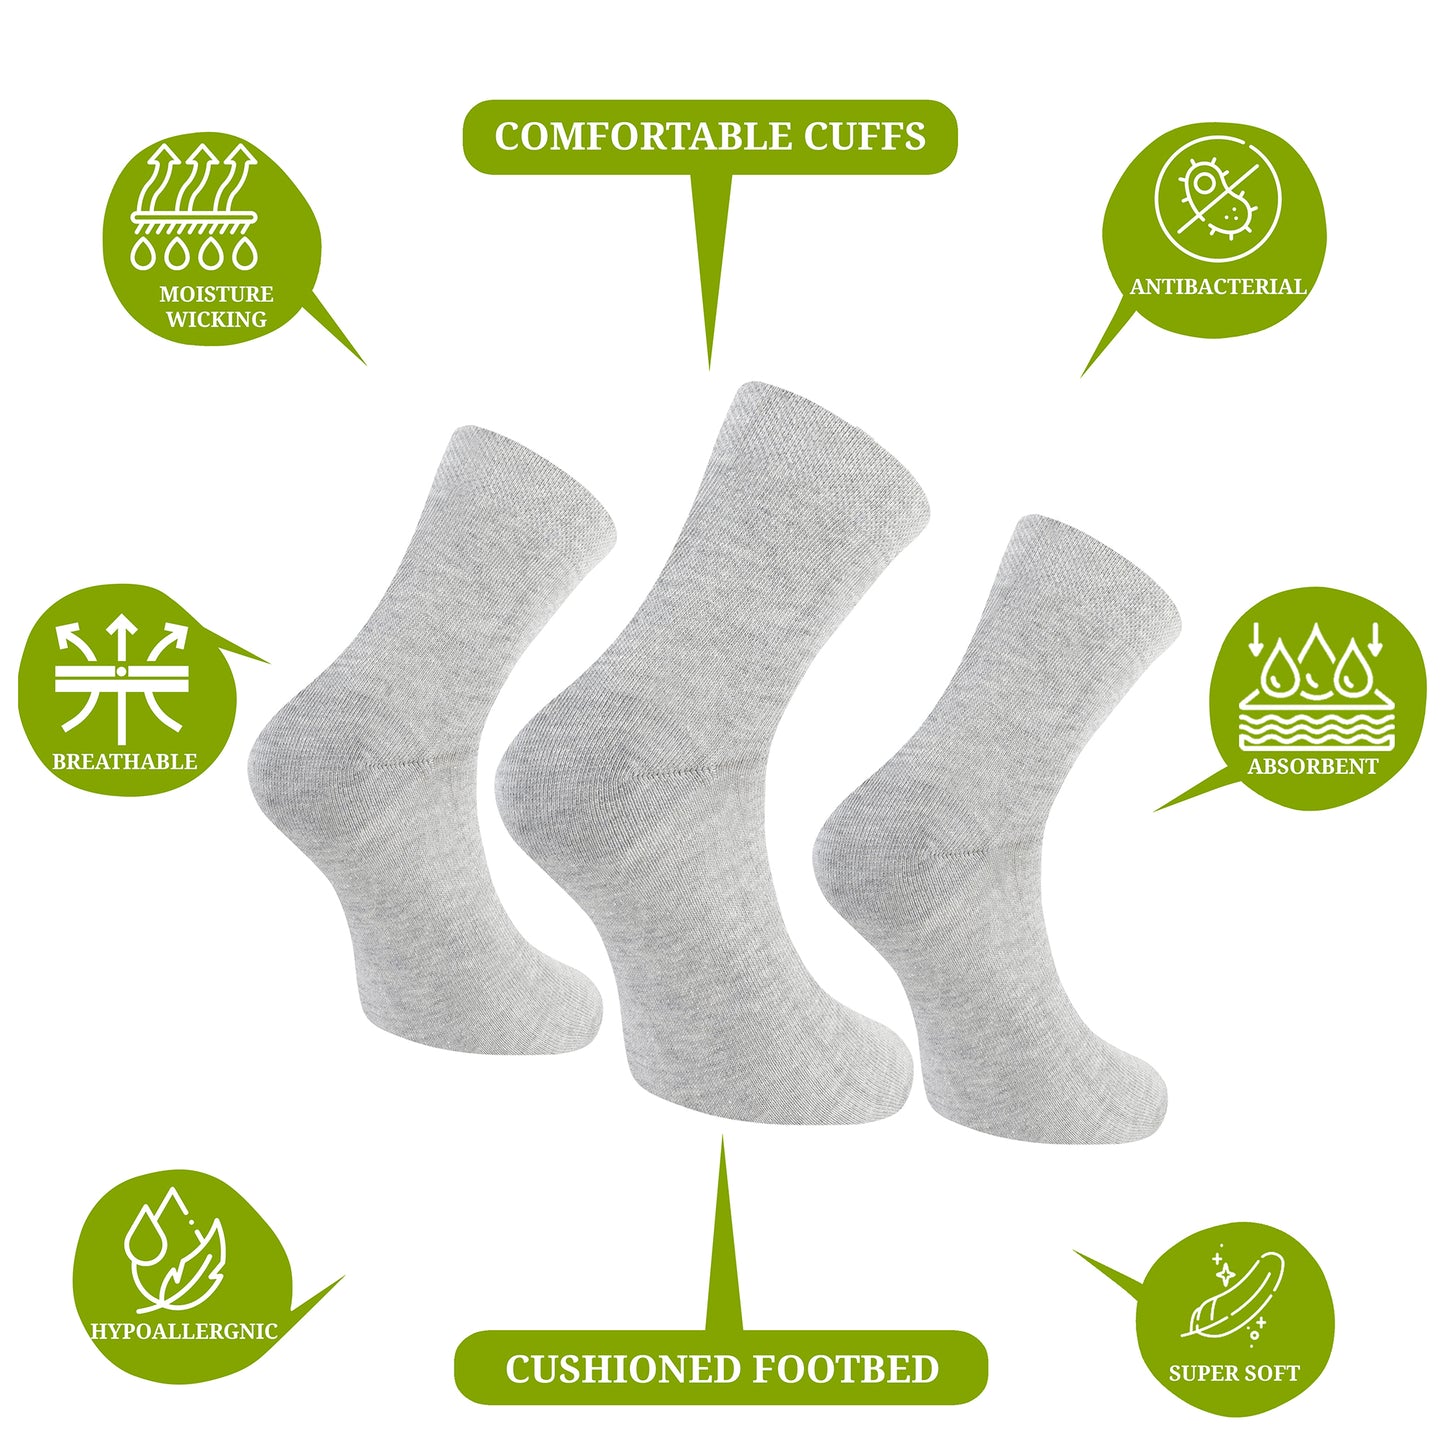 DOCTOR EXTRA SOFT D-302 Men's Premium Cushioned Cotton Ankle Socks| Half Terry,Odour-Free & Breathable| Ideal For Sports,Sneaker,Running,GymTraining,Athletic| Everyday Use Gent's/Boys PACK OF 5 (Free Size)